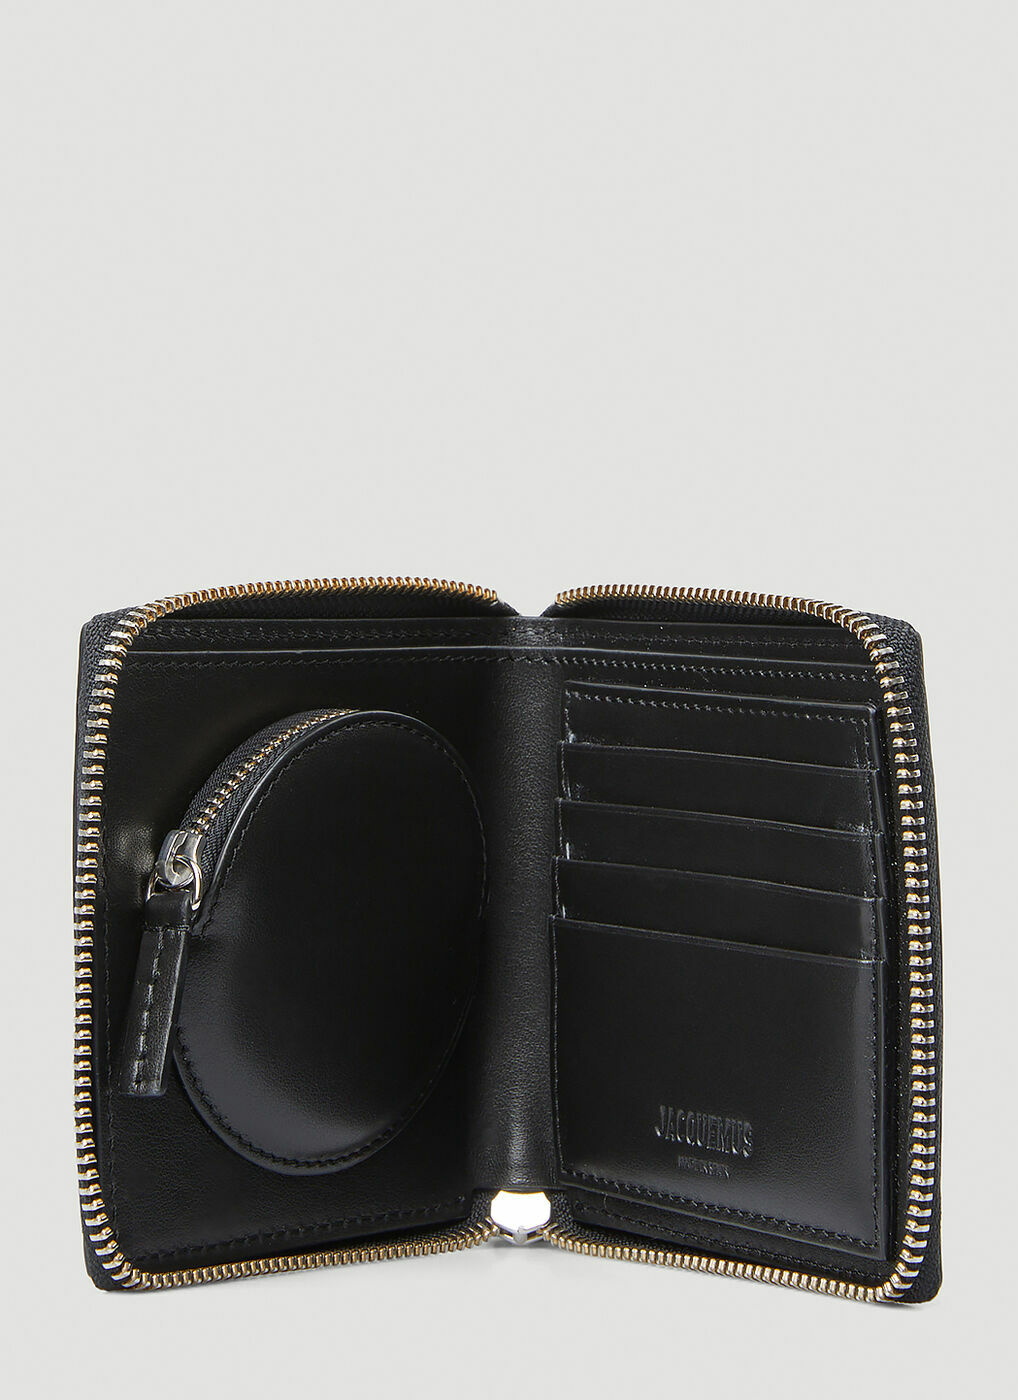 Le Carre Rond Small Leather Goods - Jacquemus - Black - Leather